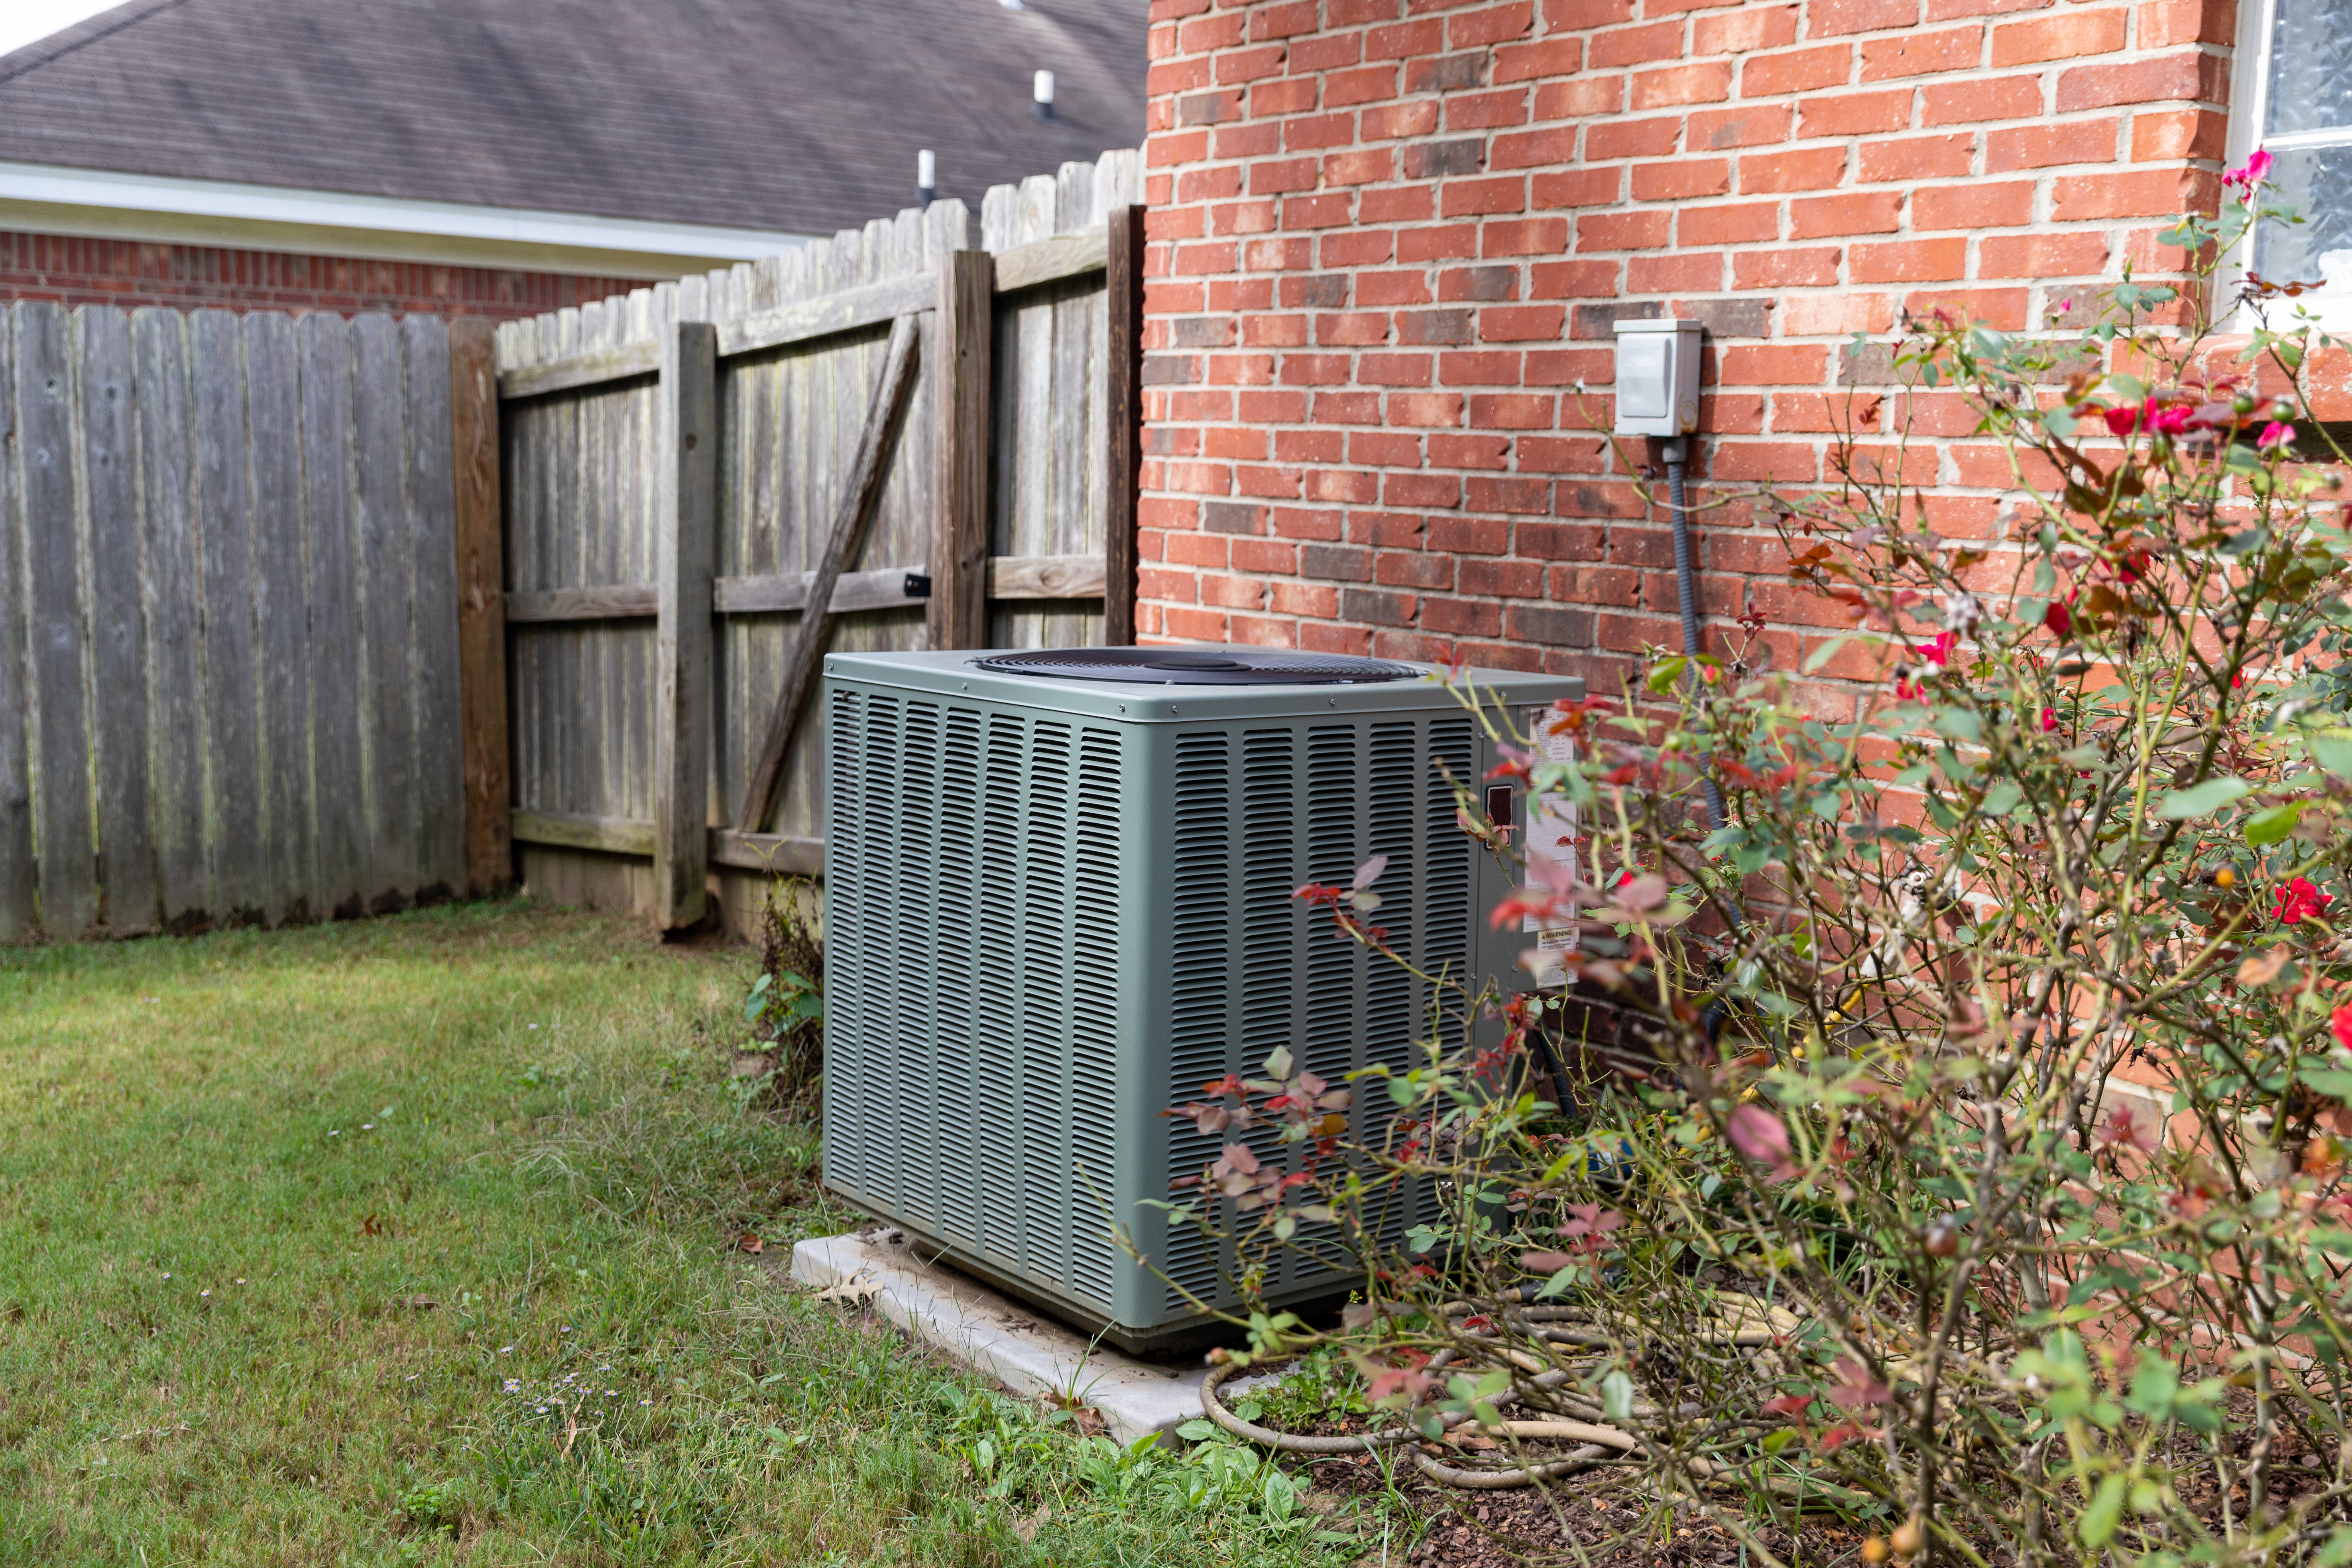 Central Air Units outside of a home in need of repair.